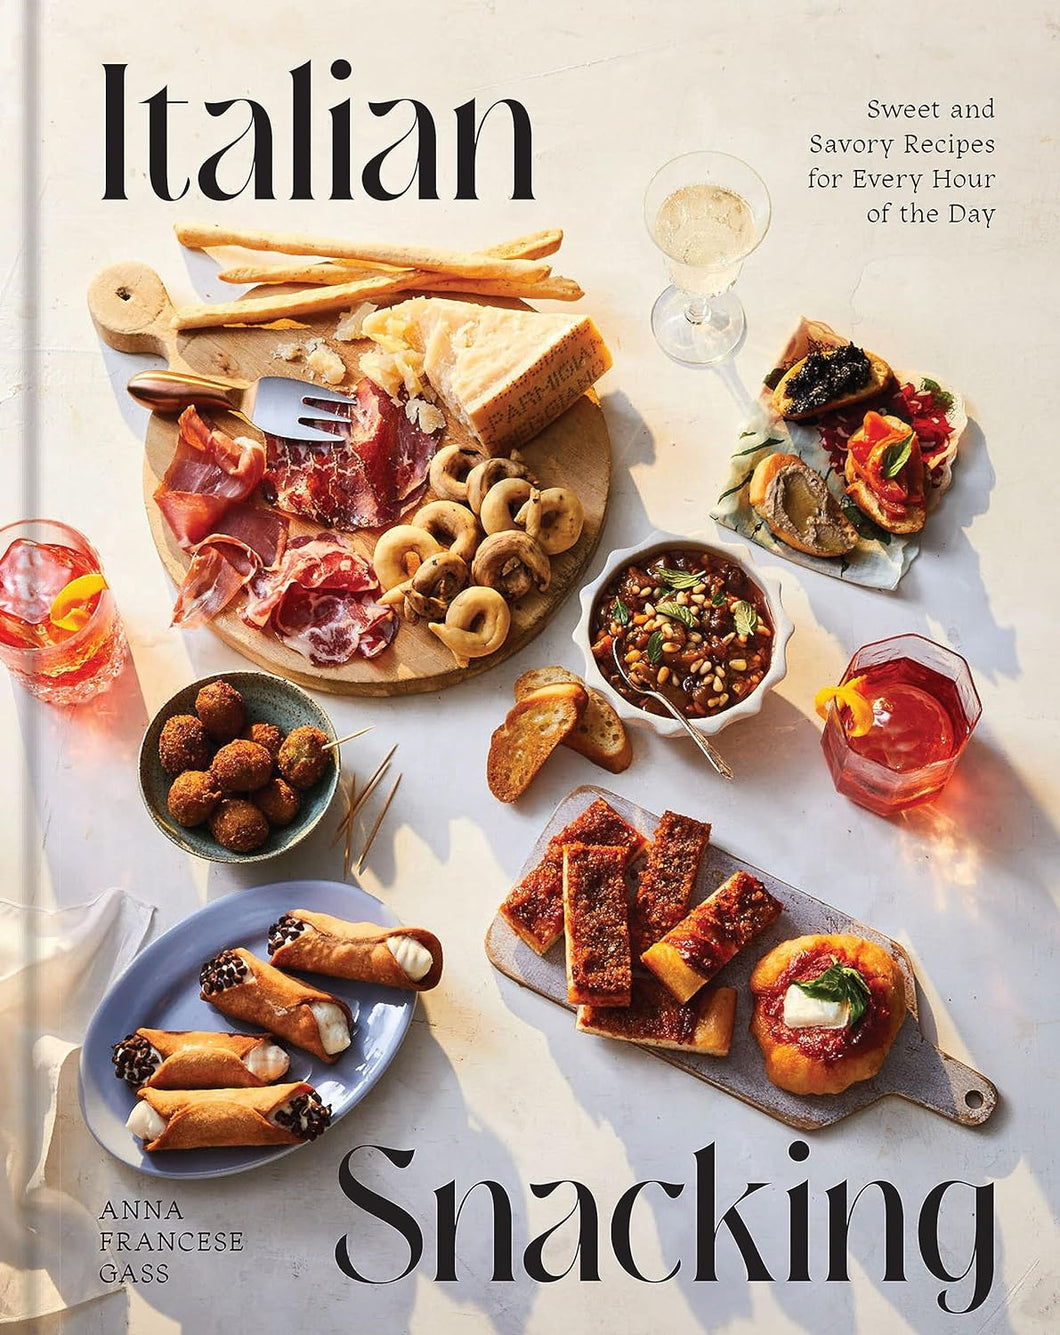 Italian Snacking: Sweet and Savory Recipes for Every Hour of the Day - A Cookbook Hardcover by Anna Francese Gass